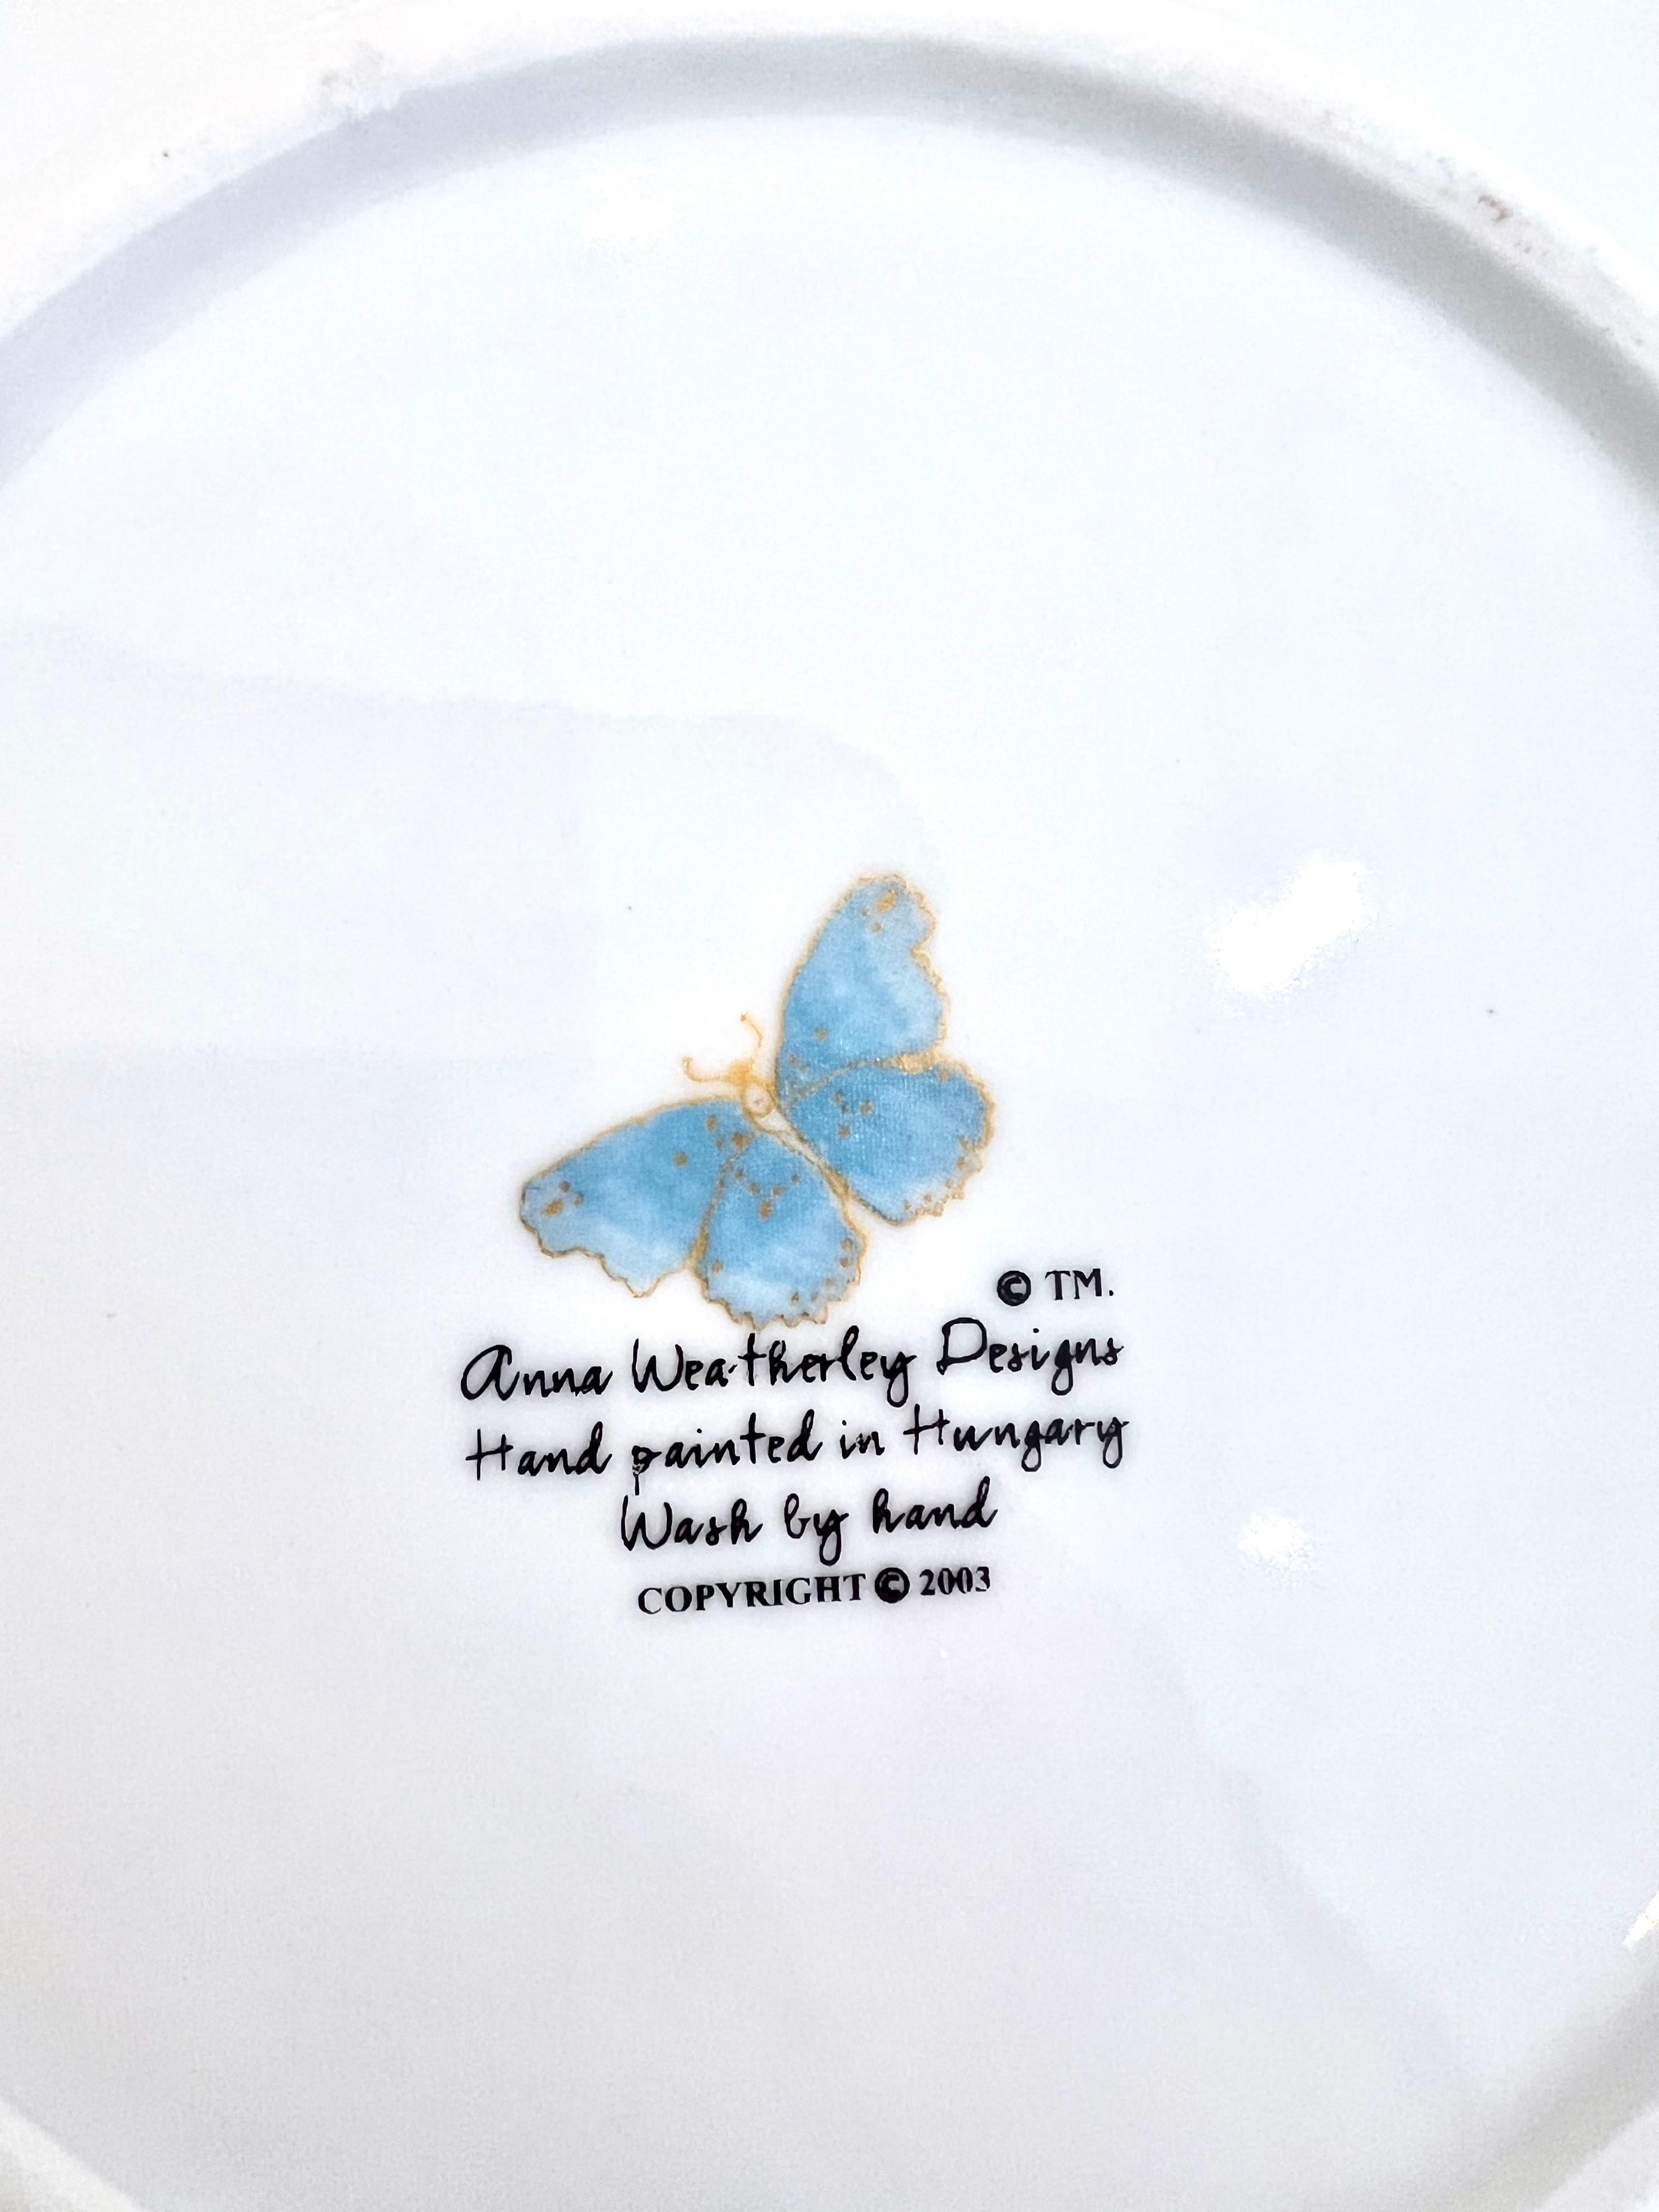 Anna Weatherley - Hand Painted Porcelain Plates 1